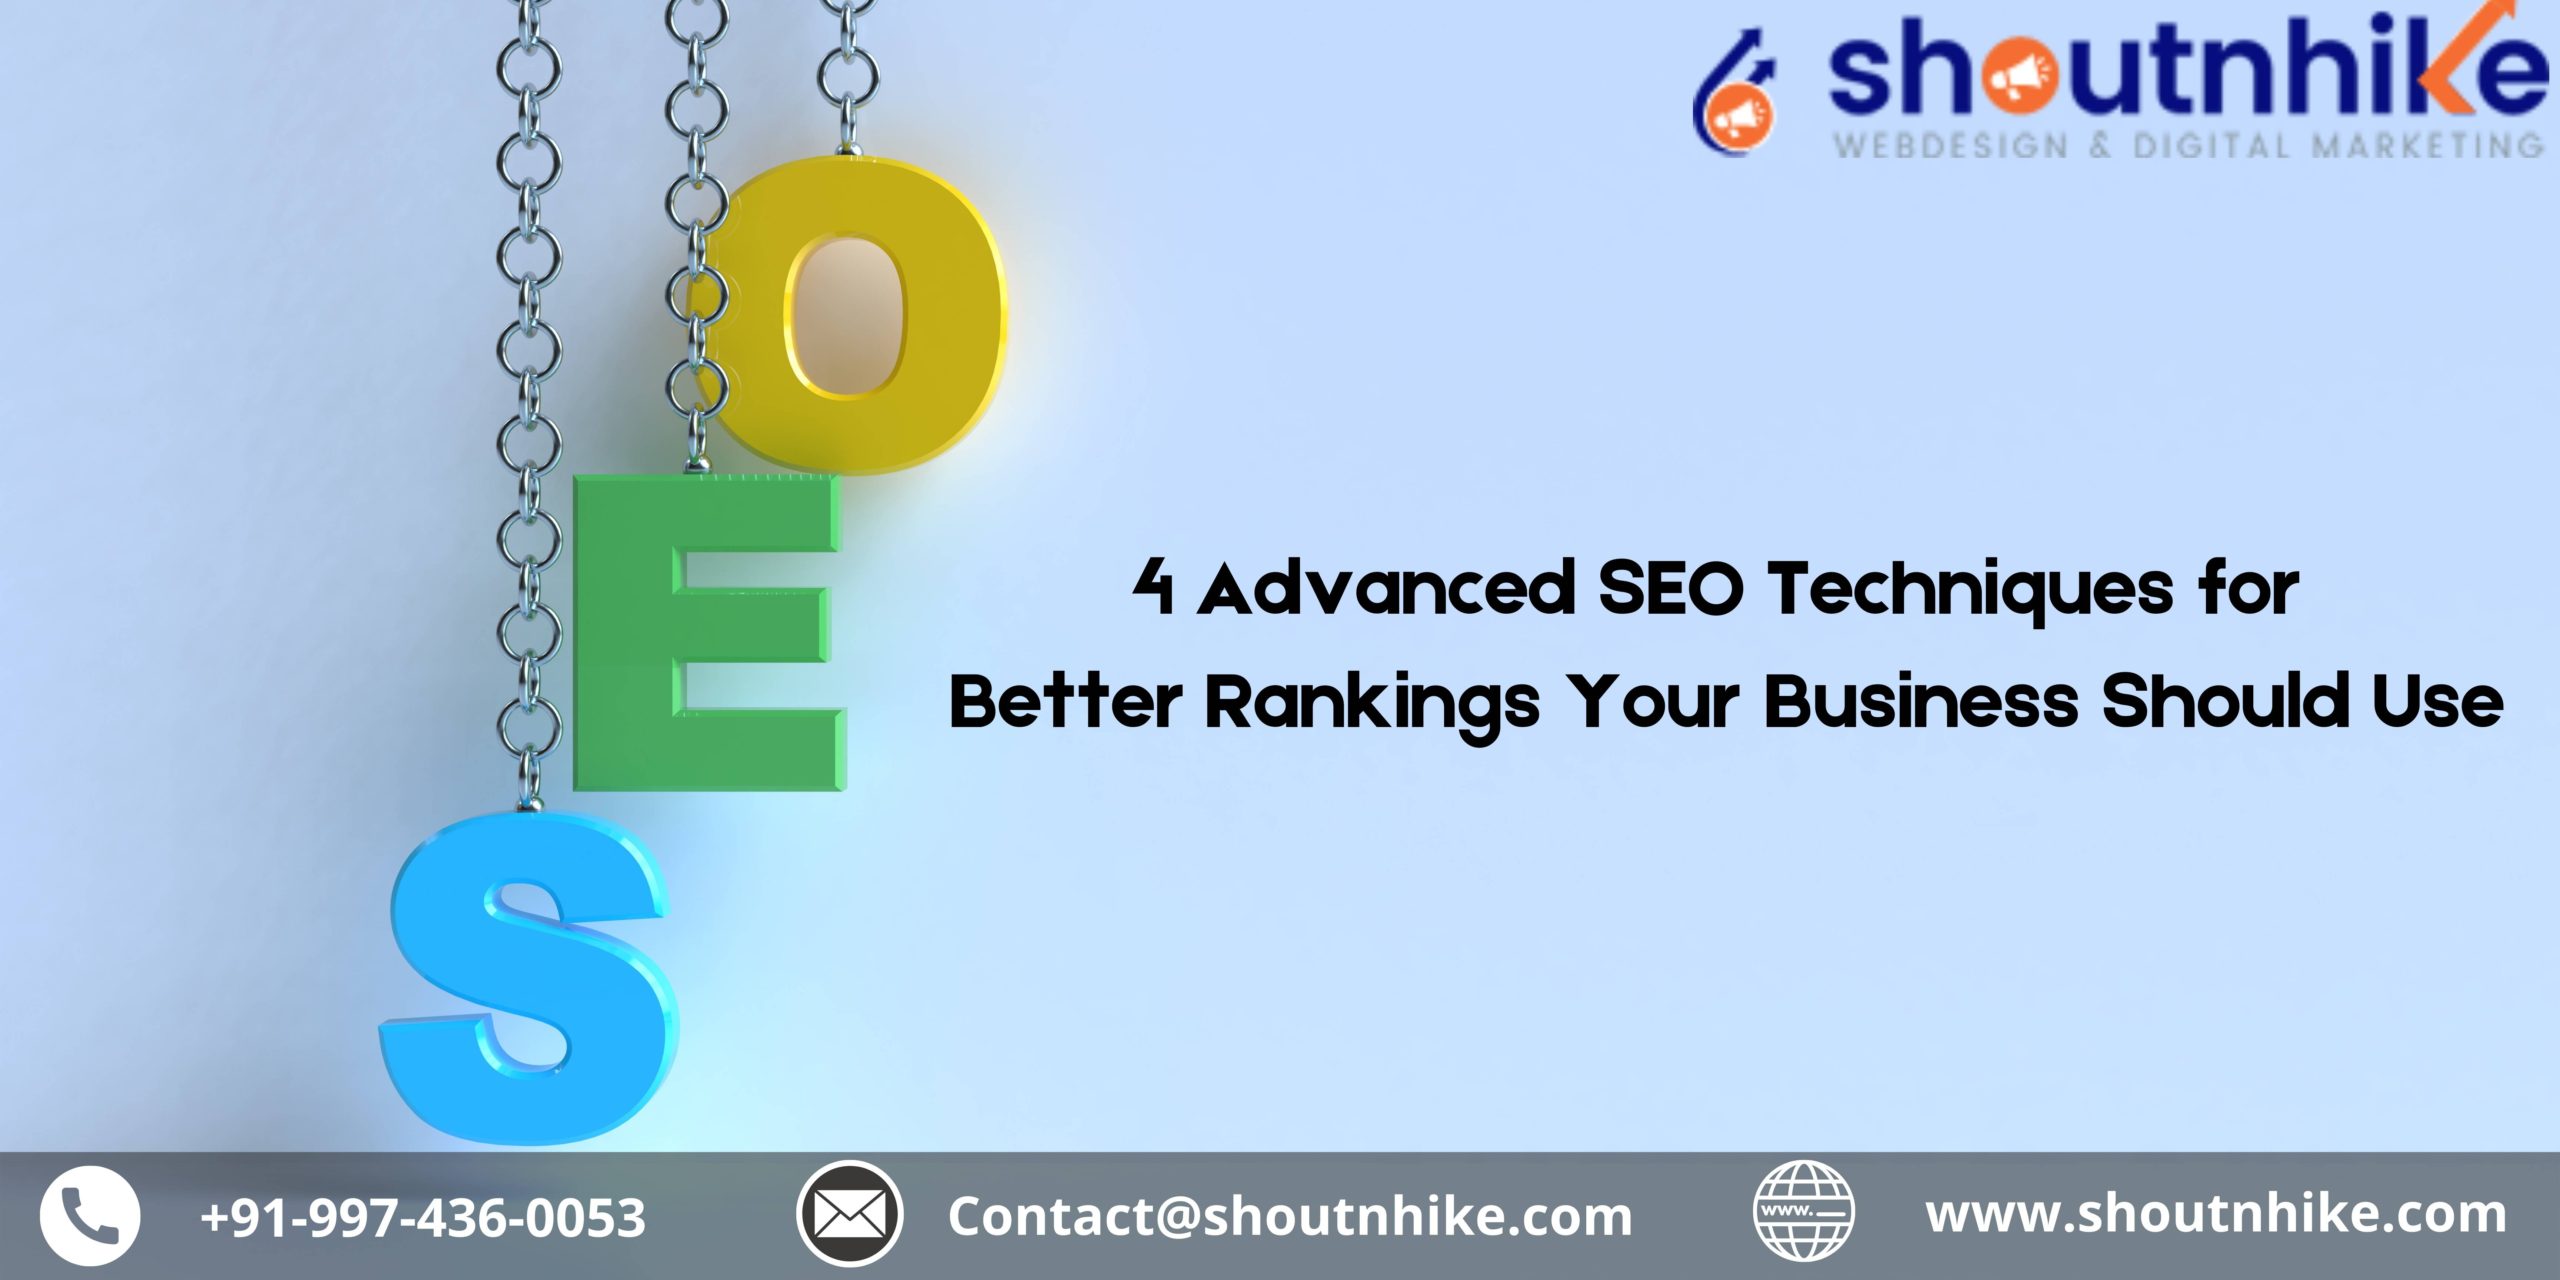 4 Advanced SEO Techniques for Better Rankings Your Business Should Use